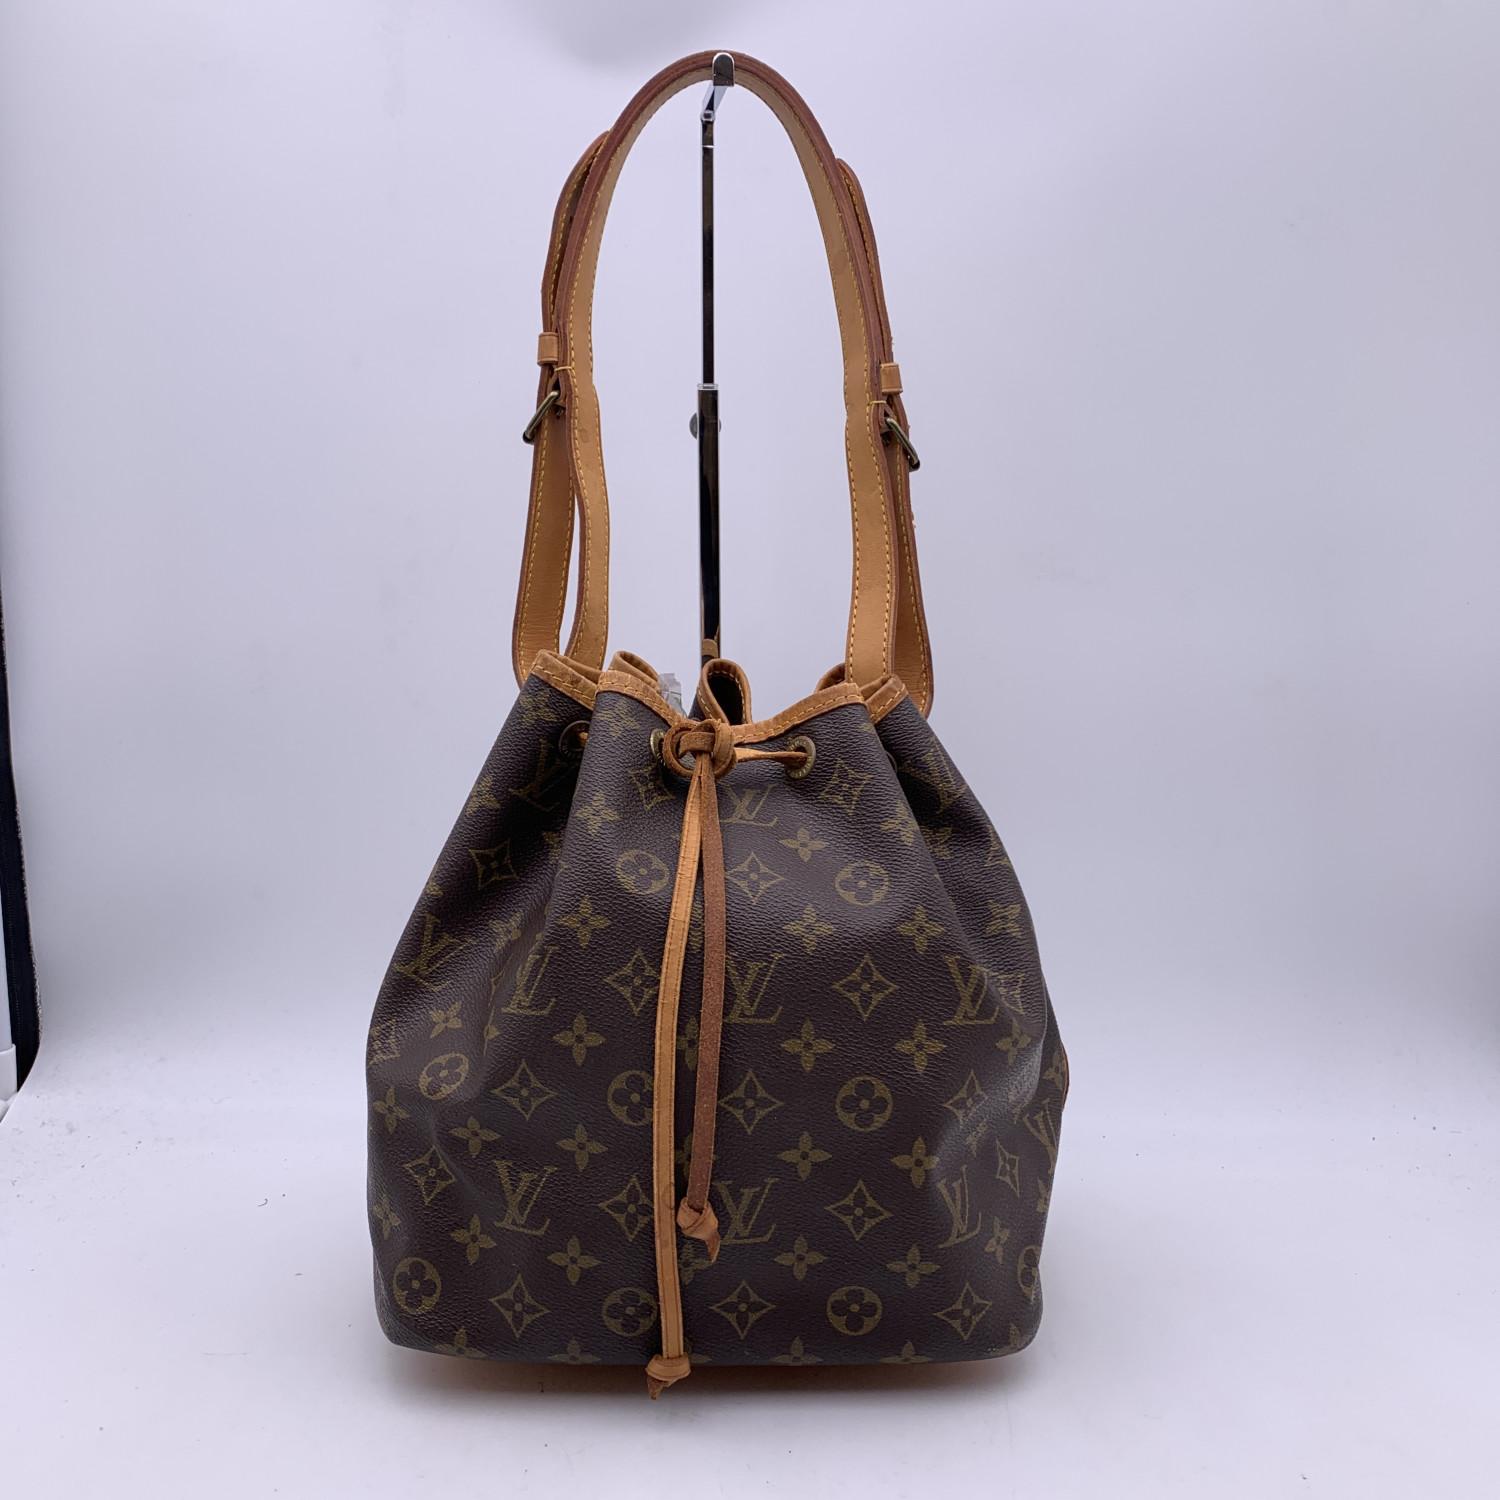 Iconic ' Petit Noé' bucket bag by LOUIS VUITTON was first created in 1932 to carry champagne bottles. Monogram canvas with genuine leather trim and shoulder strap. It features drawstring closure and brown canvas lining. Adjustable shoulder strap.